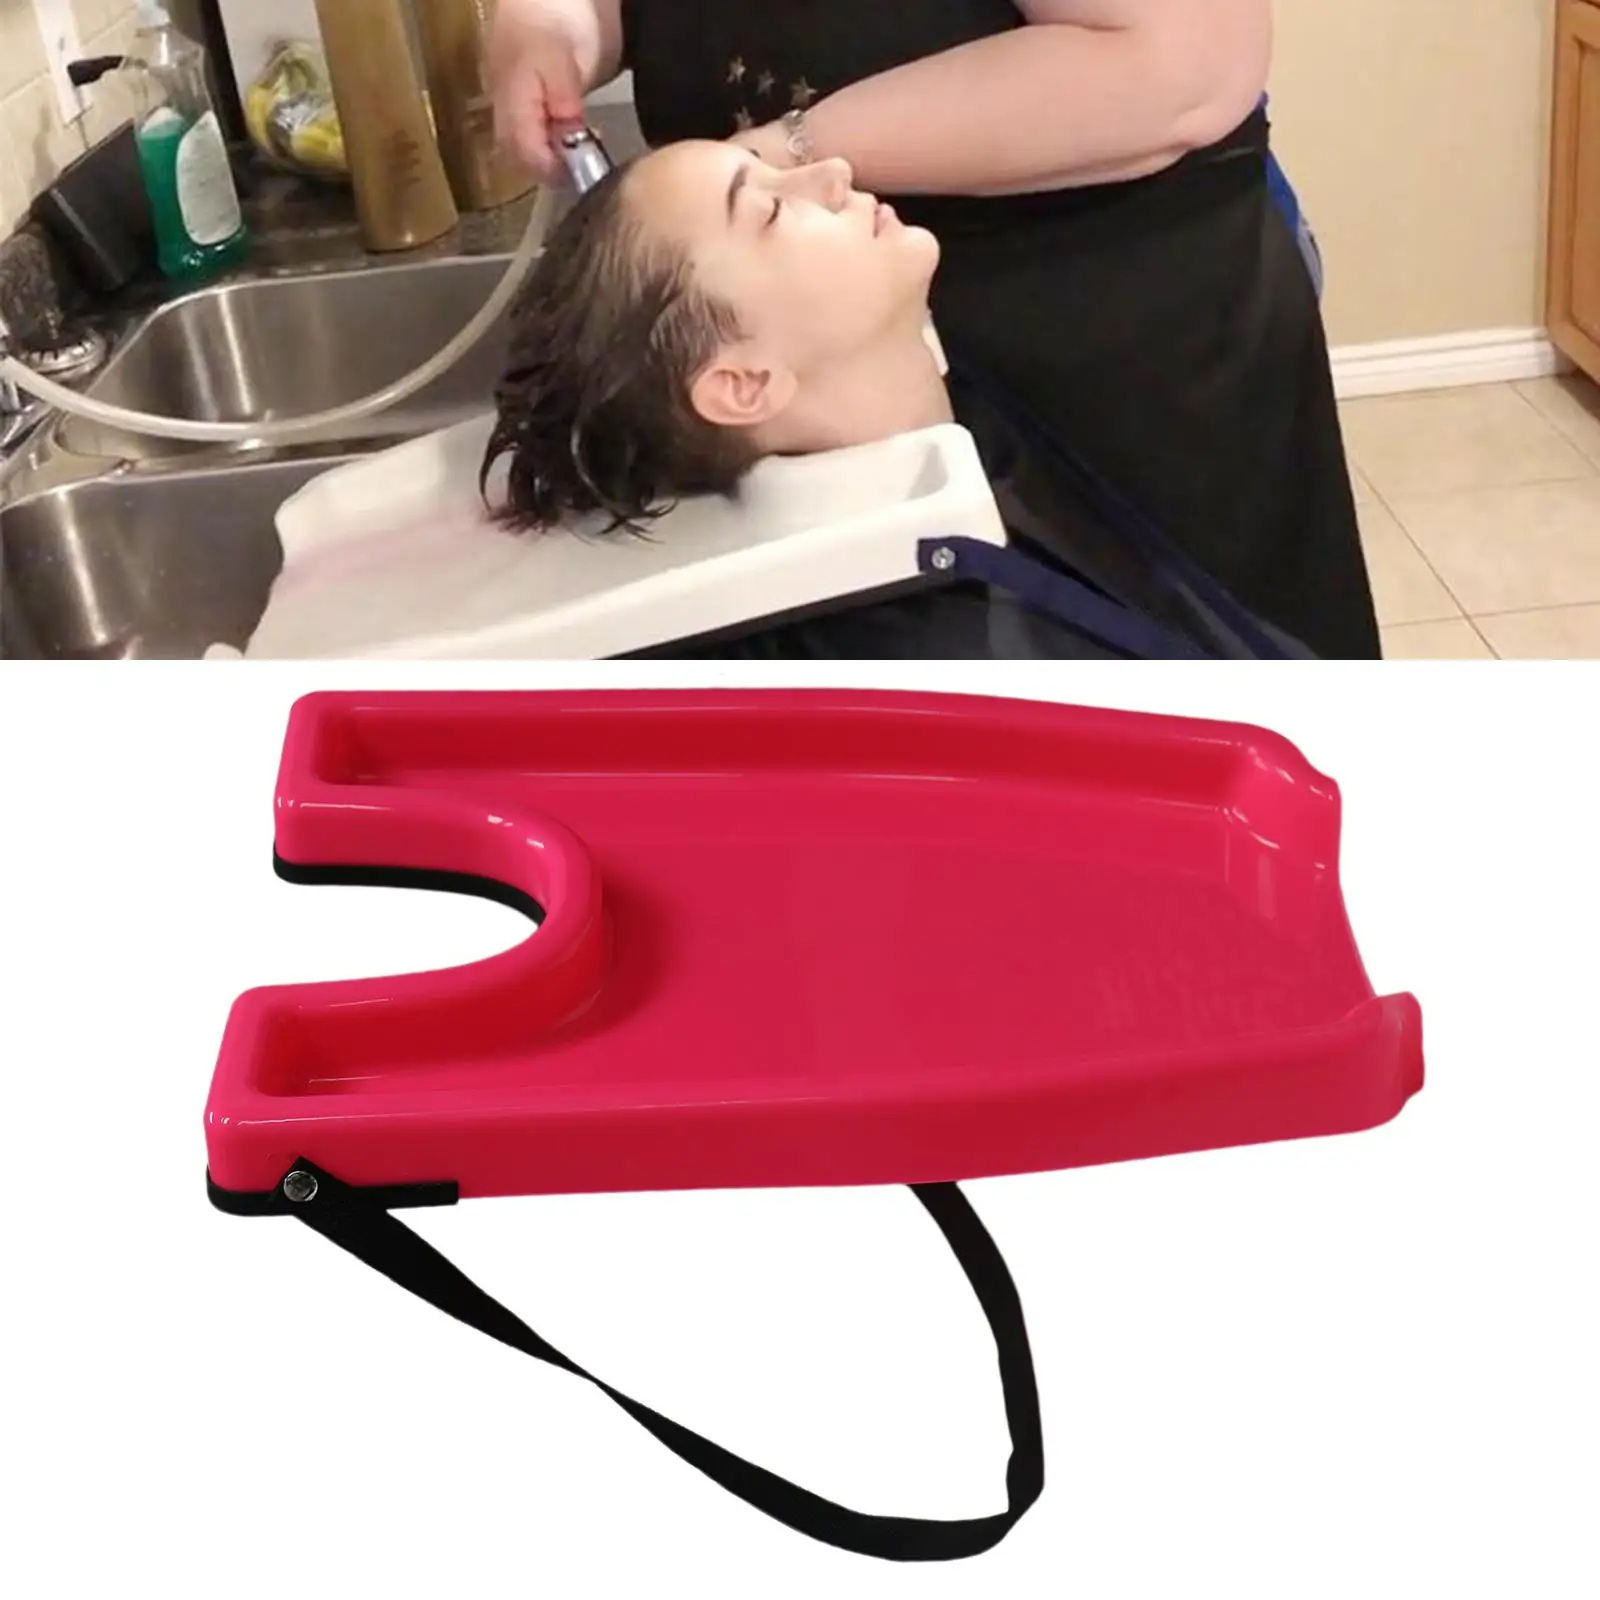 Portable Shampoo Bowl - Hair Washing Tray for Sink at Home, Convenient for Old People, Disabled People or Mobility Limit